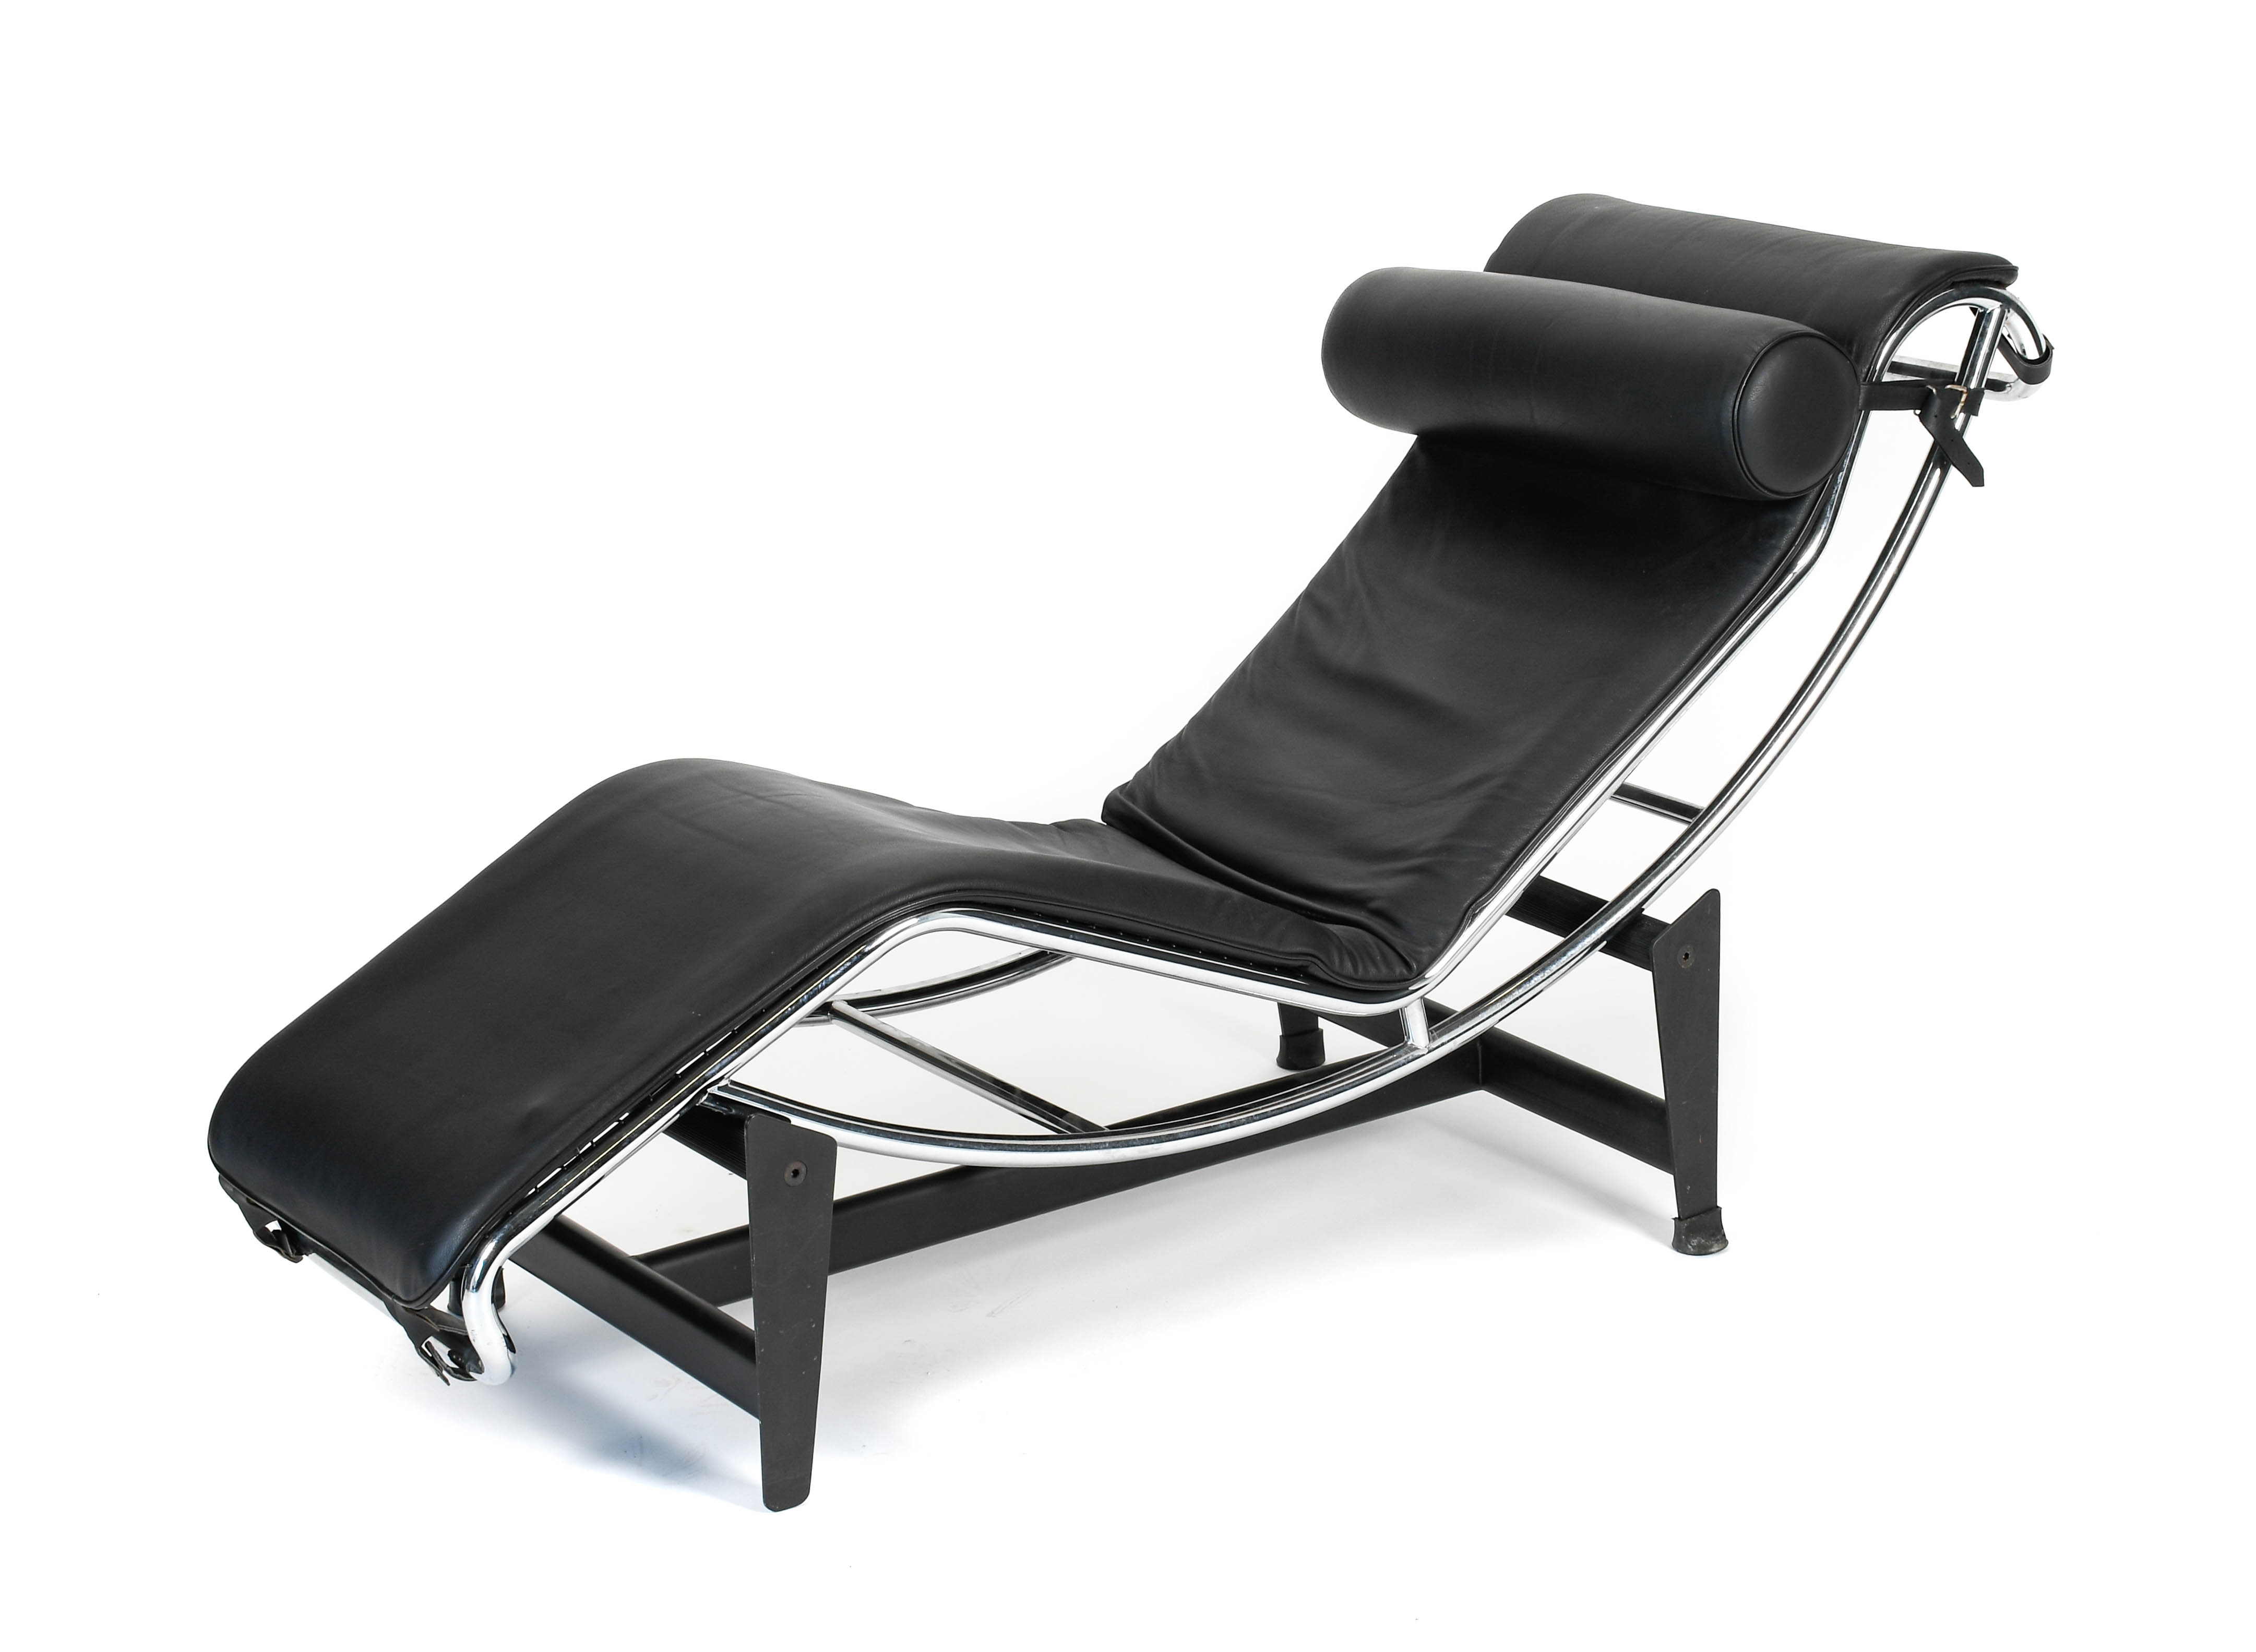 Sold at Auction: Replica Le Corbusier LC4 Chaise Longue with